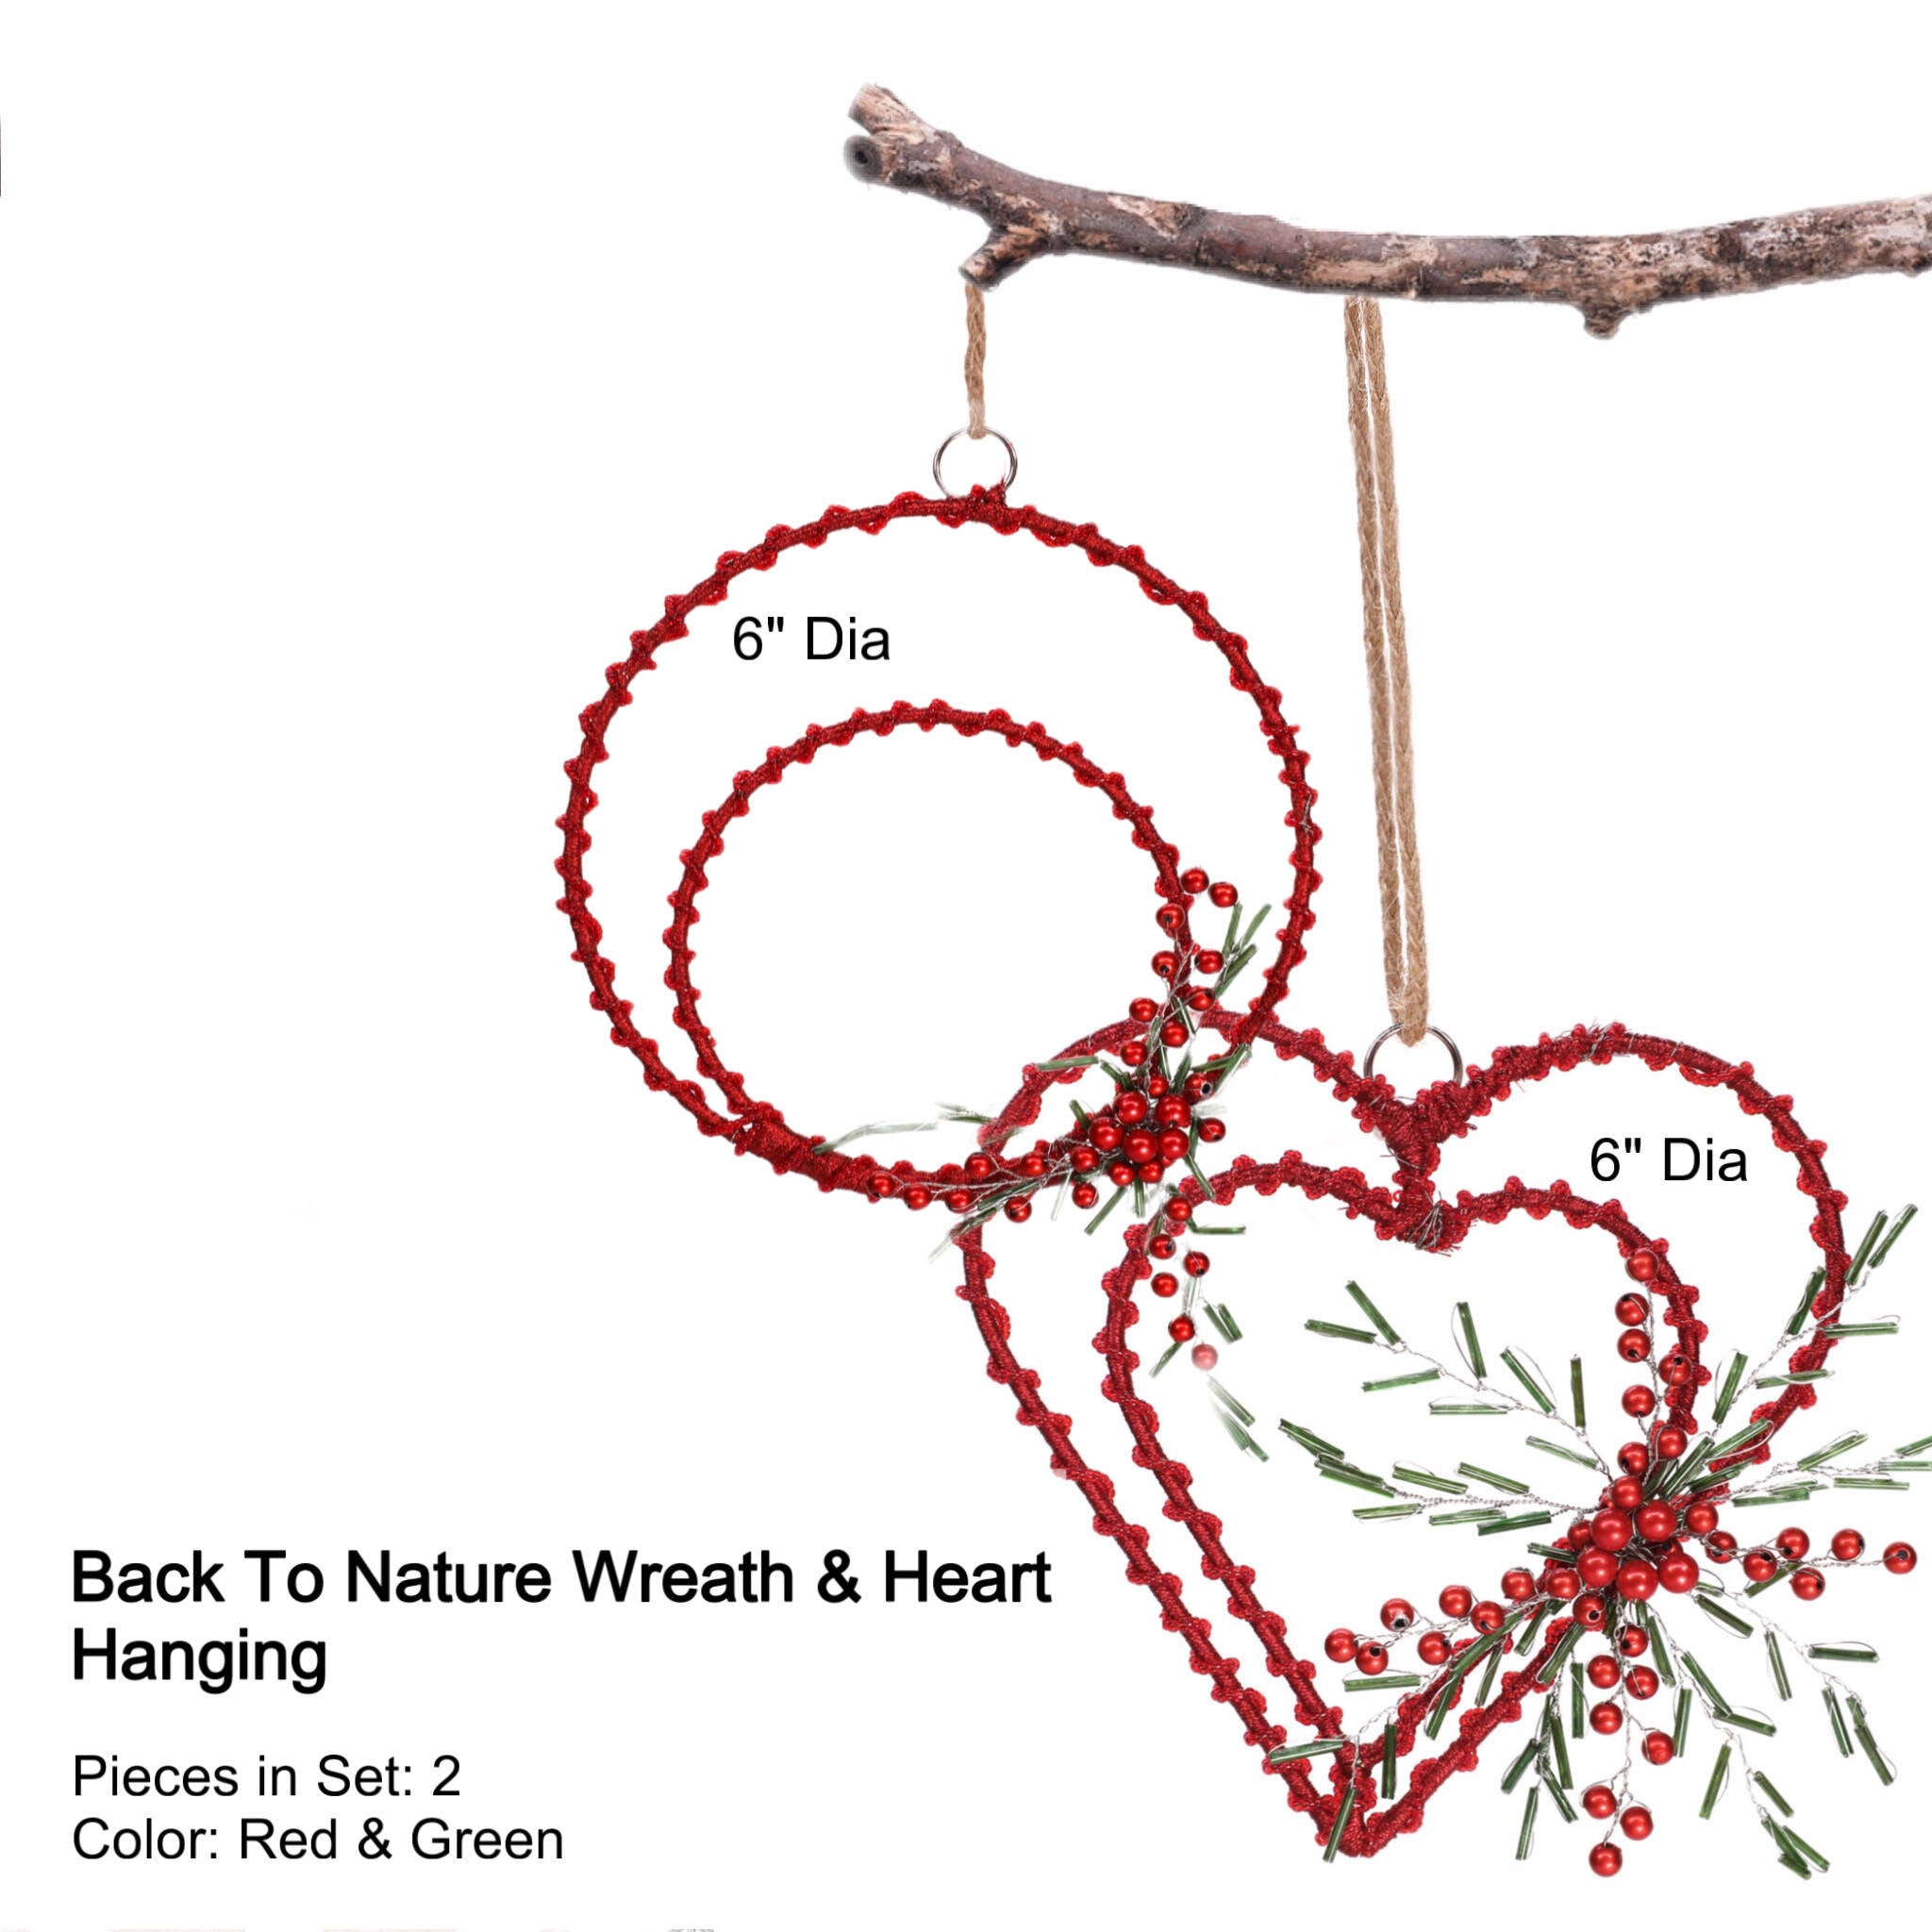 Back To Nature Wreath & Heart Hanging in Red & Green, Set of 2